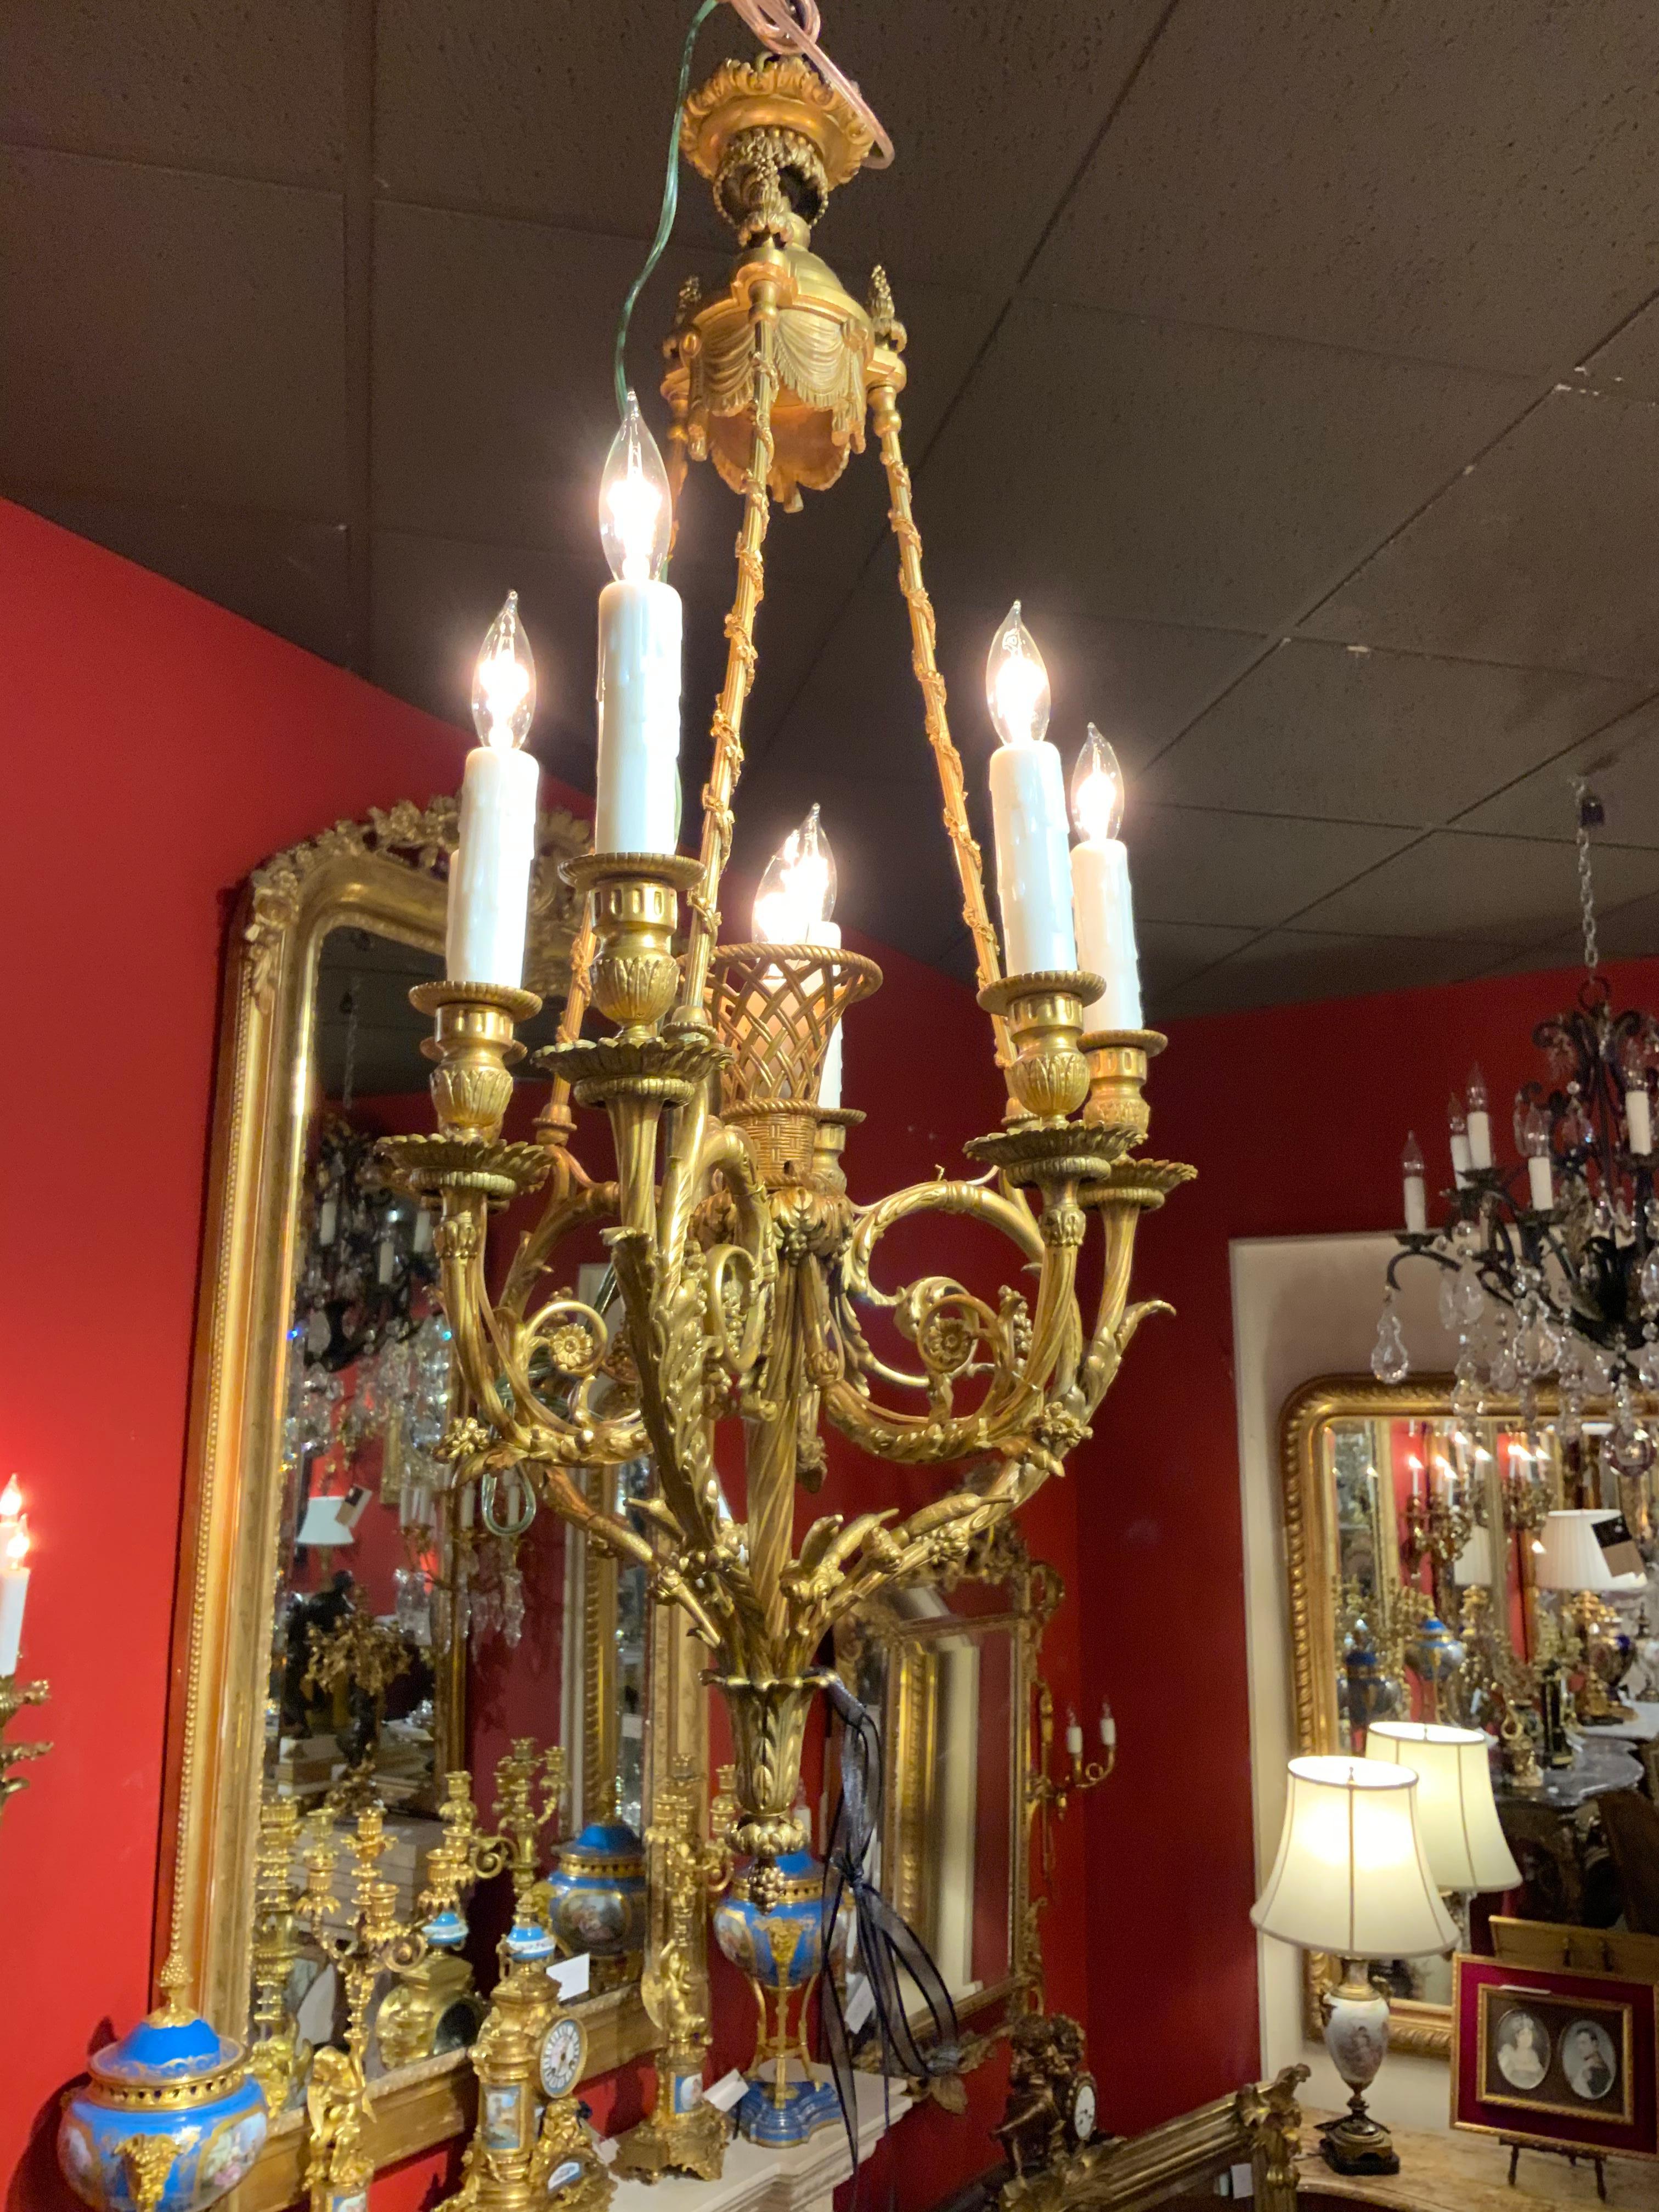 Lovely French gilt bronze 7-light chandelier with a central basket that supports a light.
Six lights circle the perimeter being supported by ornate scrolling arms.